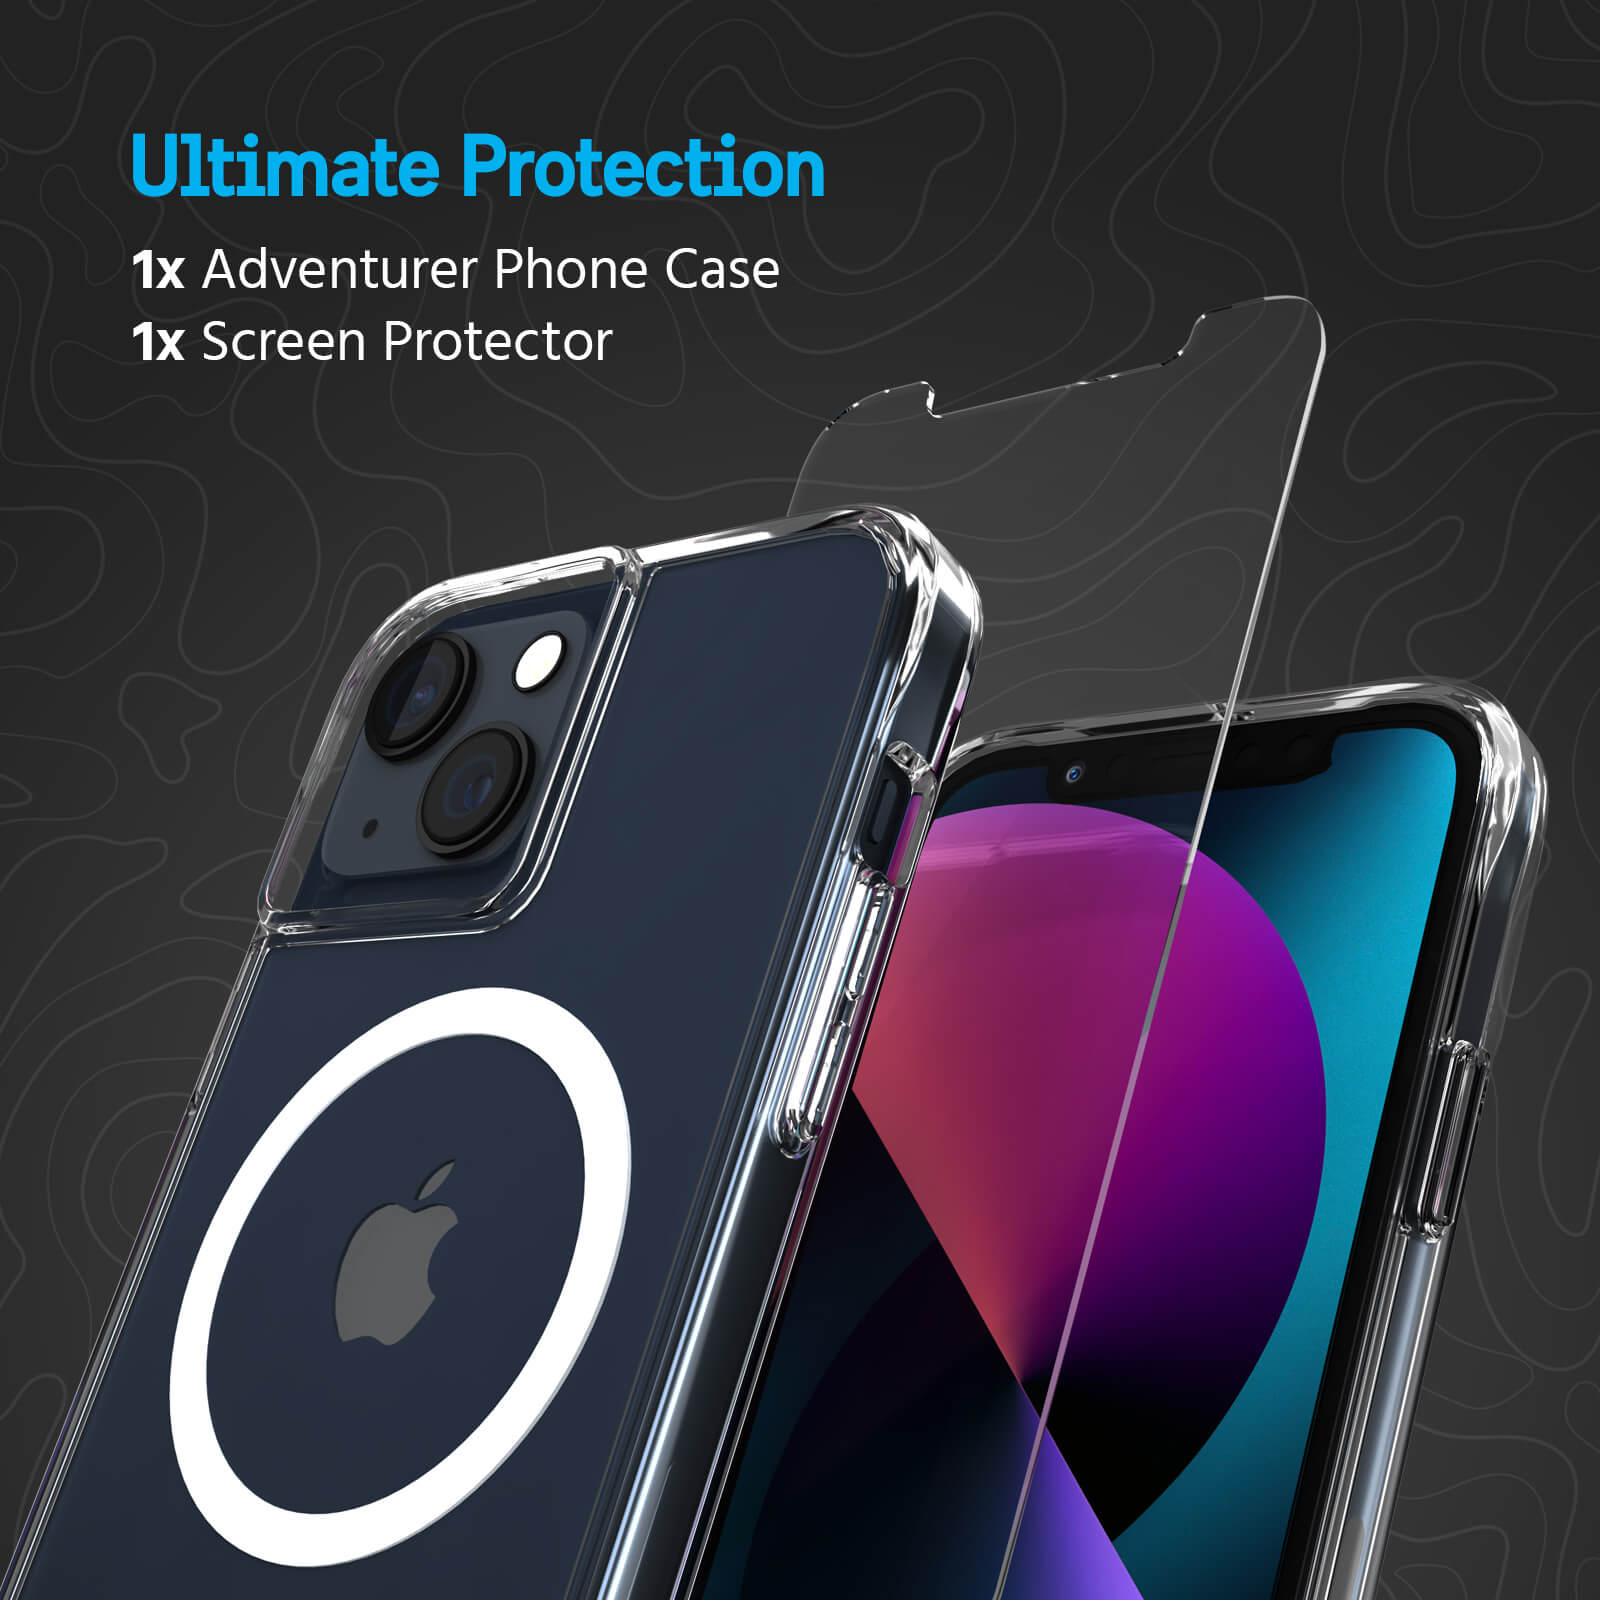 ULTIMATE PROTECTION. 1X ADVENTURER CASE, 1X SCREEN PROTECTOR COLOR::CLEAR